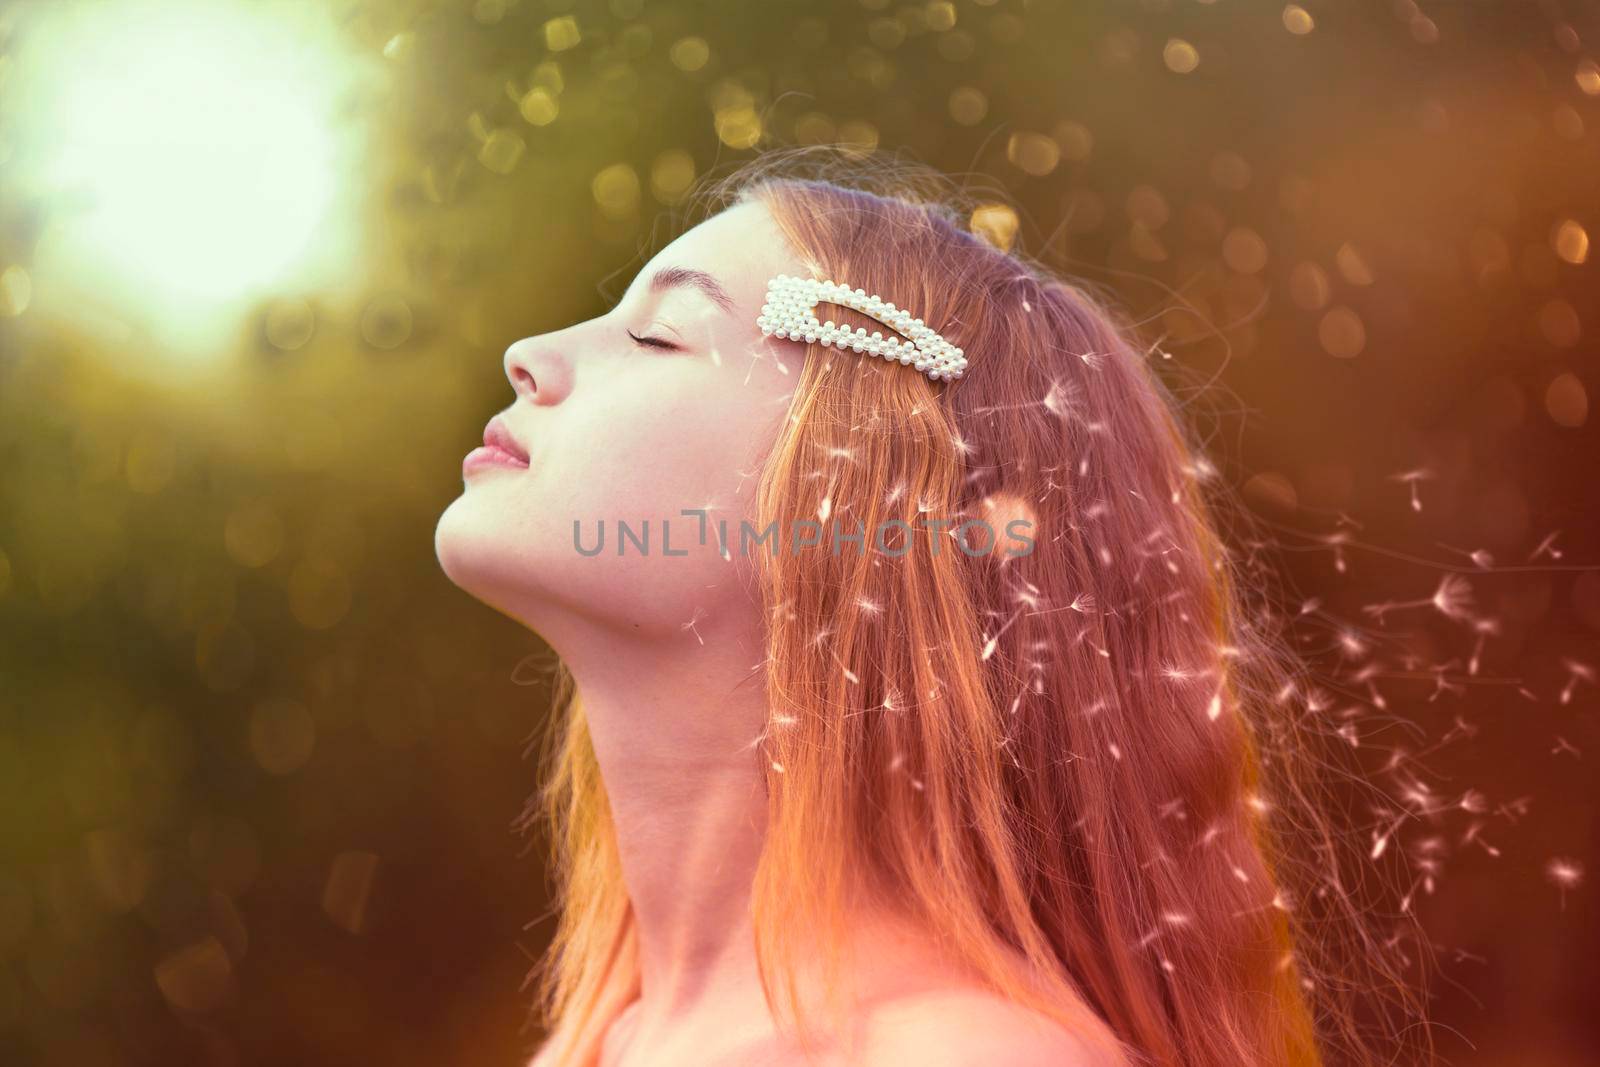 Beauty model girl profile with flying dandelions. Beautiful young woman with long romantic hair.